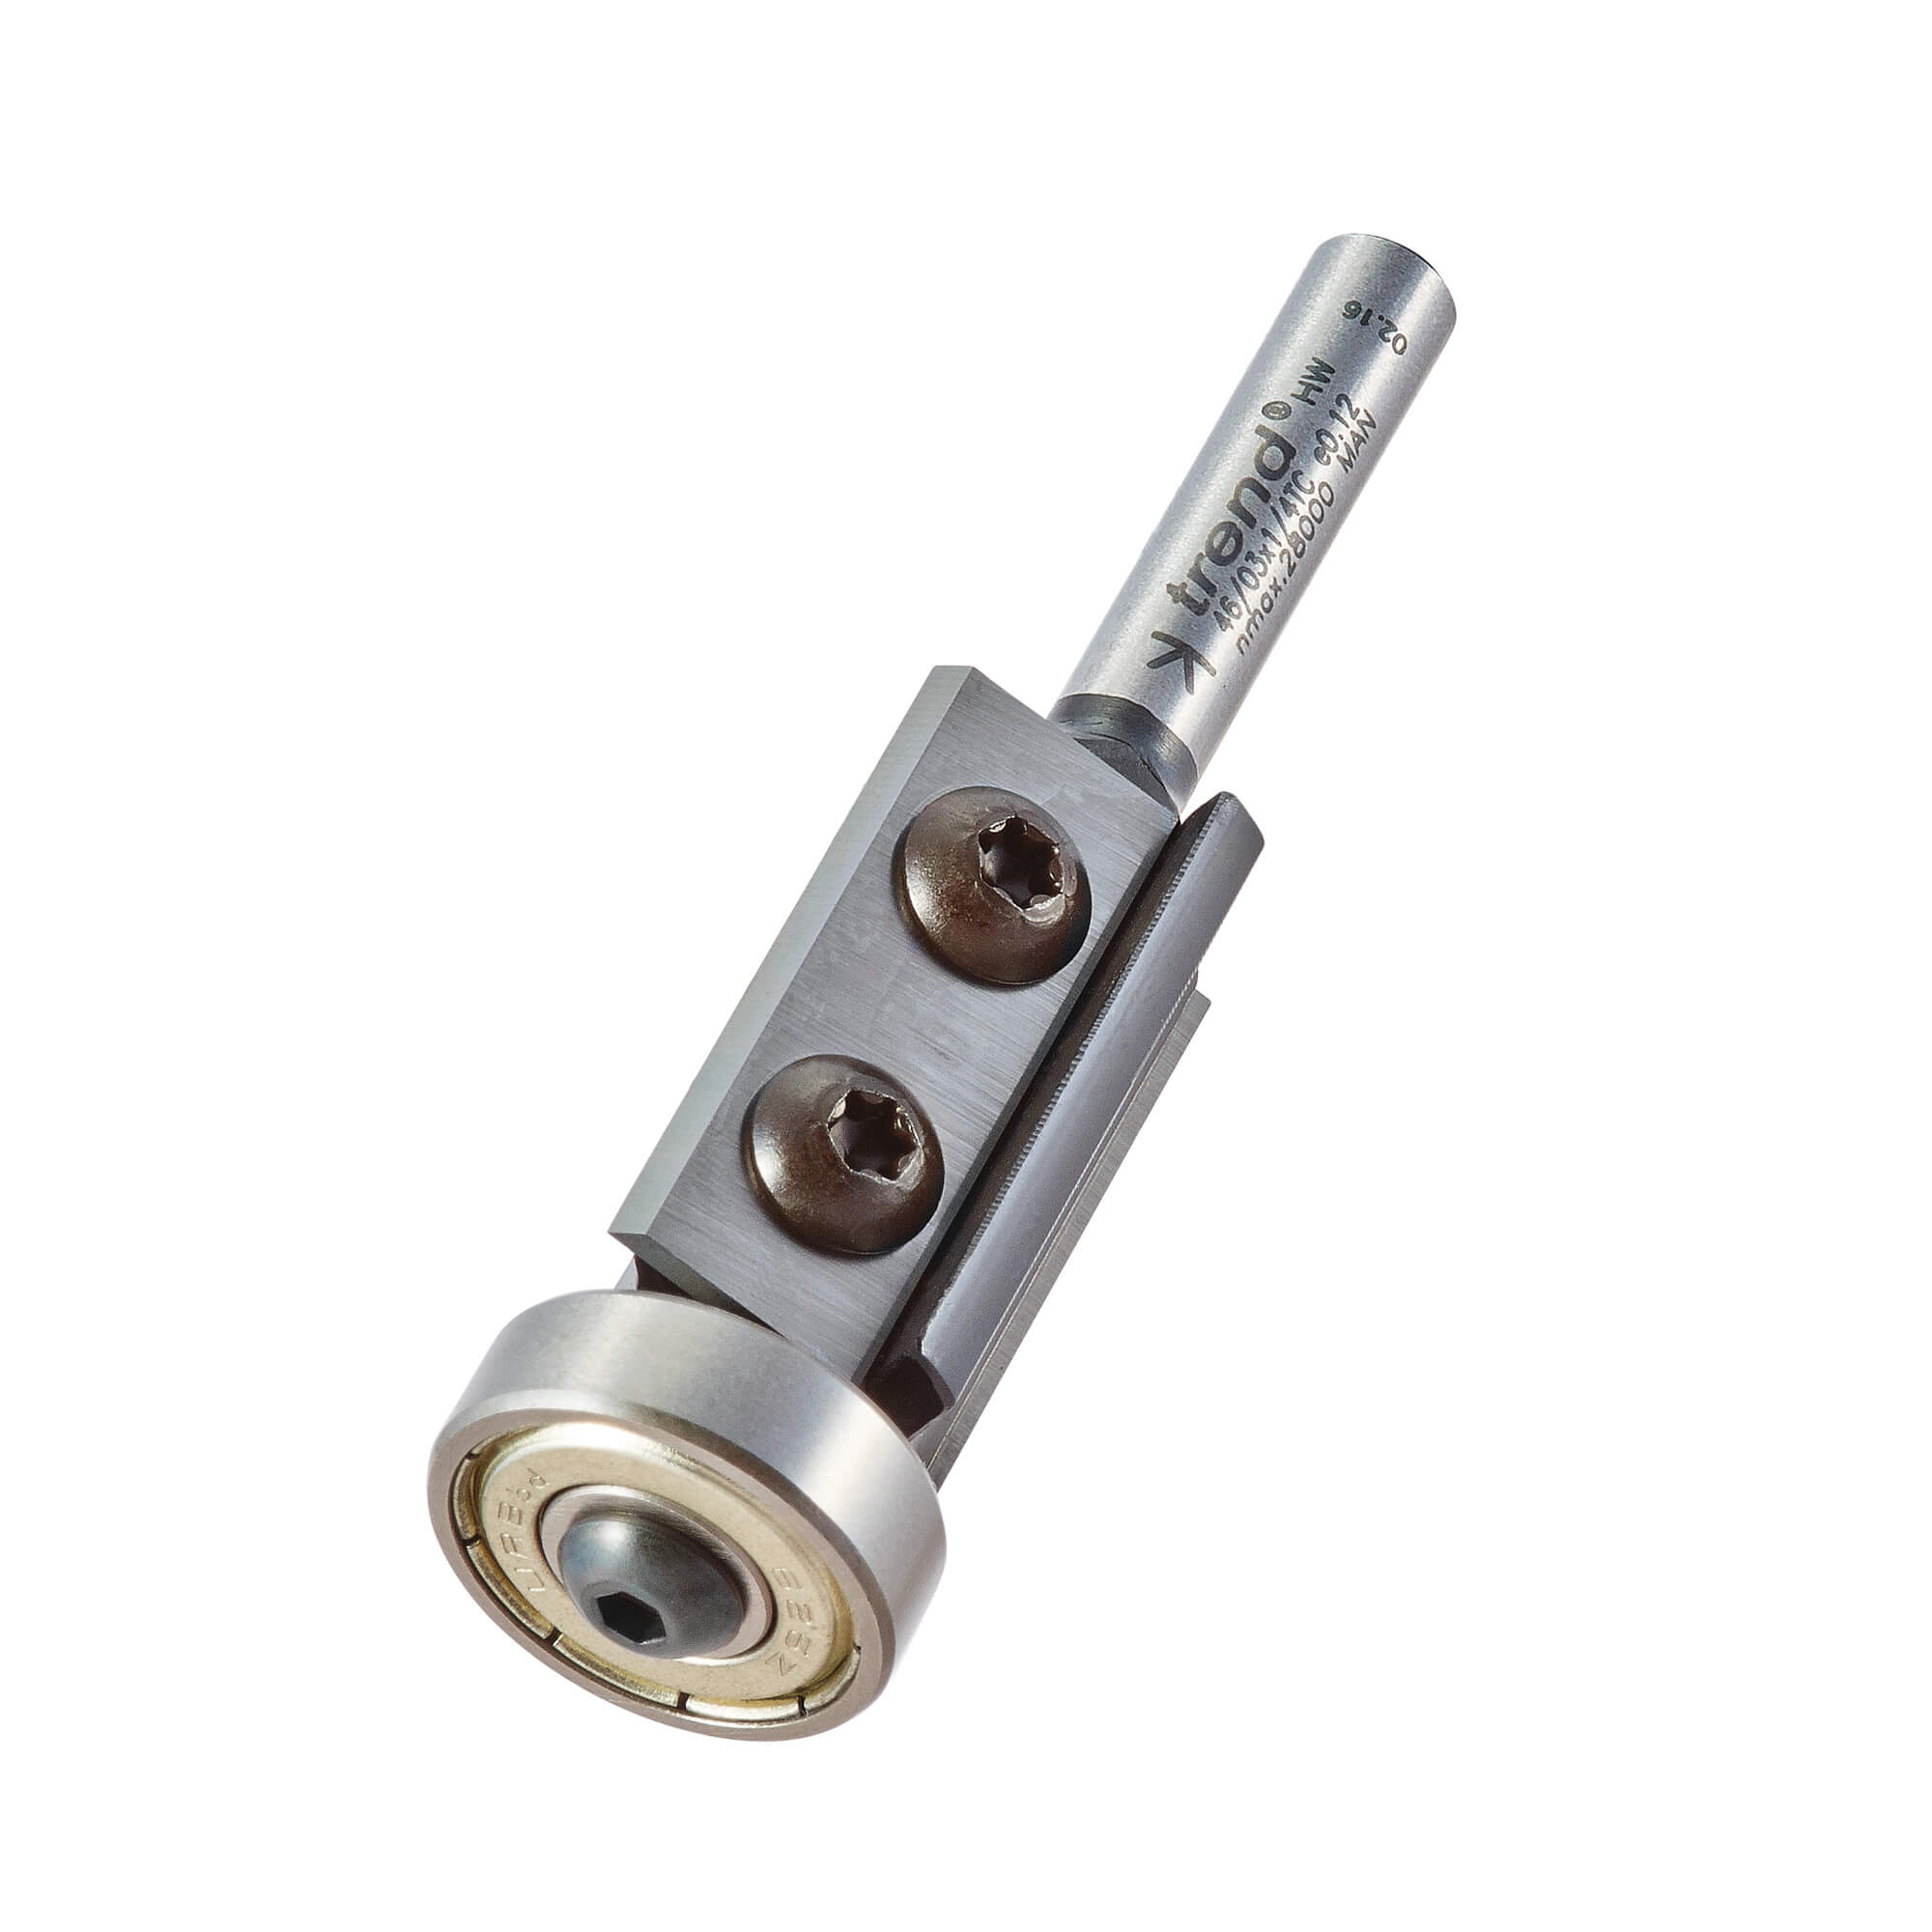 Photo of Trend Rotatip Trimmer Bearing Guided Router Cutter 19mm 30mm 1/4